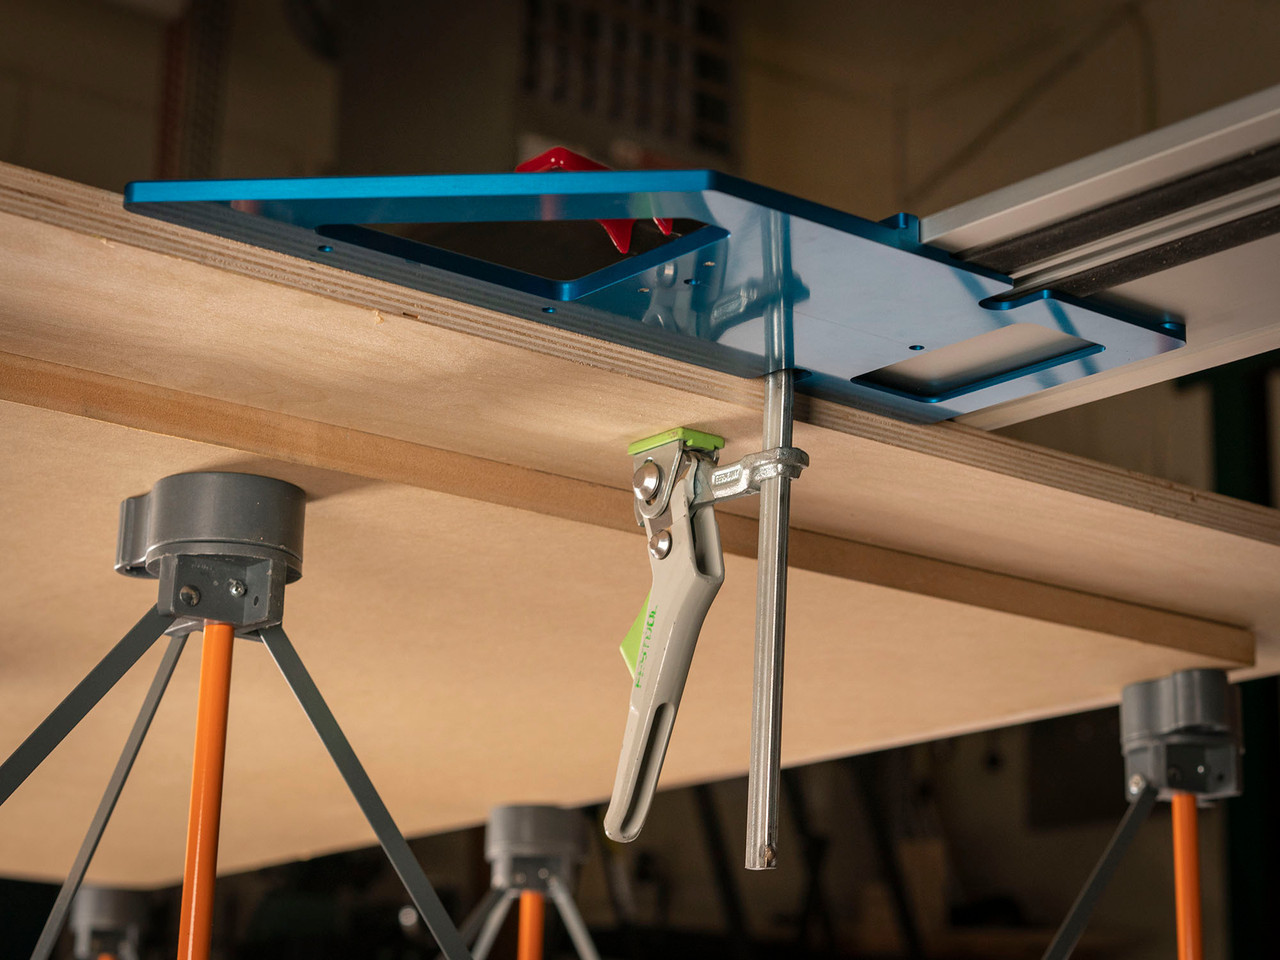 Integrated clamping slot enables use of Festool's screw or rapid clamps.